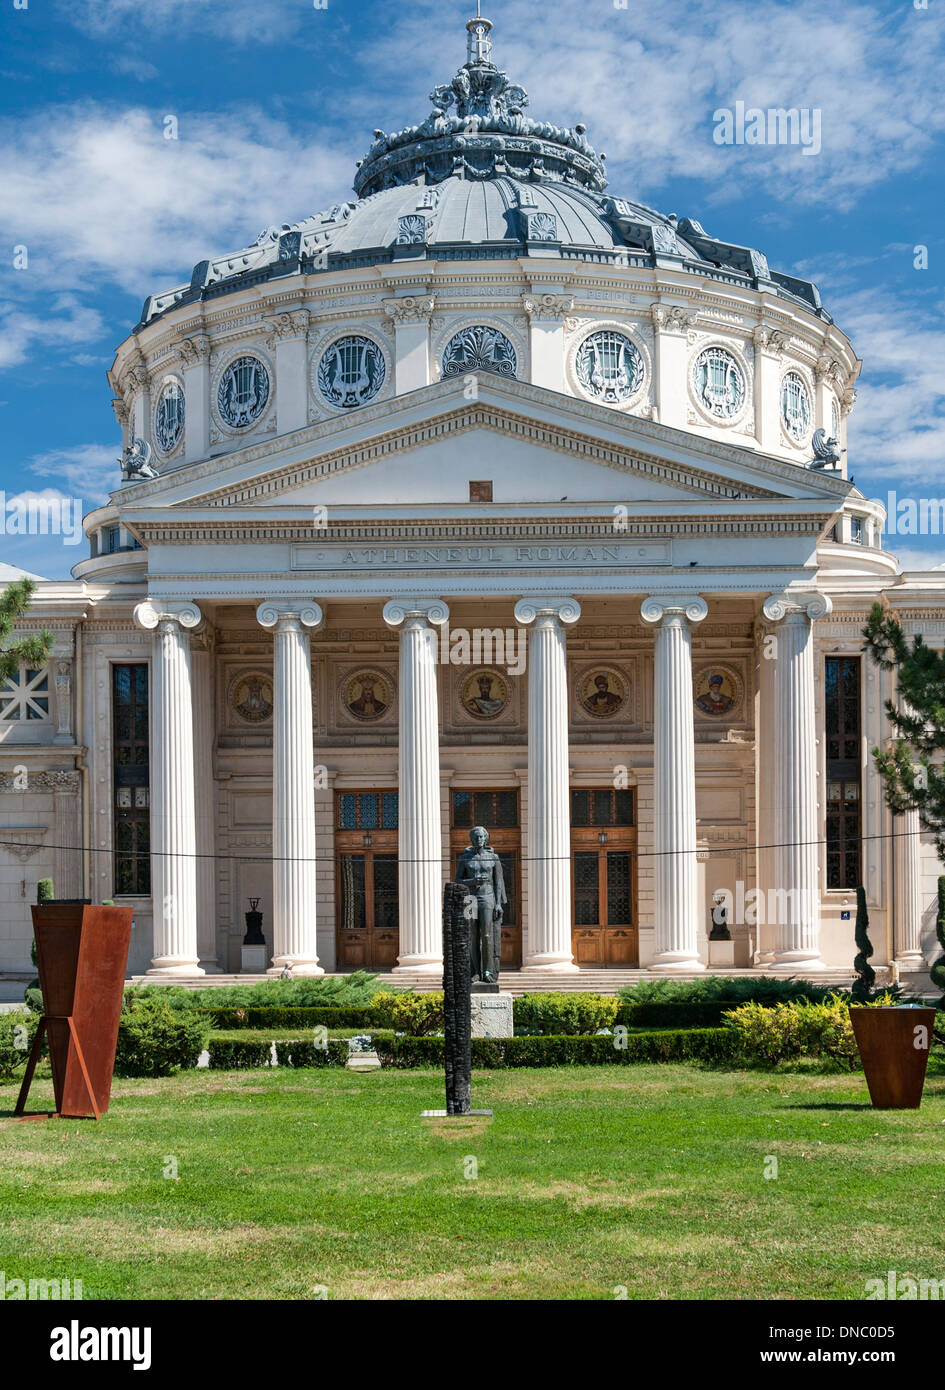 The Romanian Atheneum, a concert hall and landmark in central Bucharest, the capital of Romania. It was inaugurated in 1888. Stock Photo